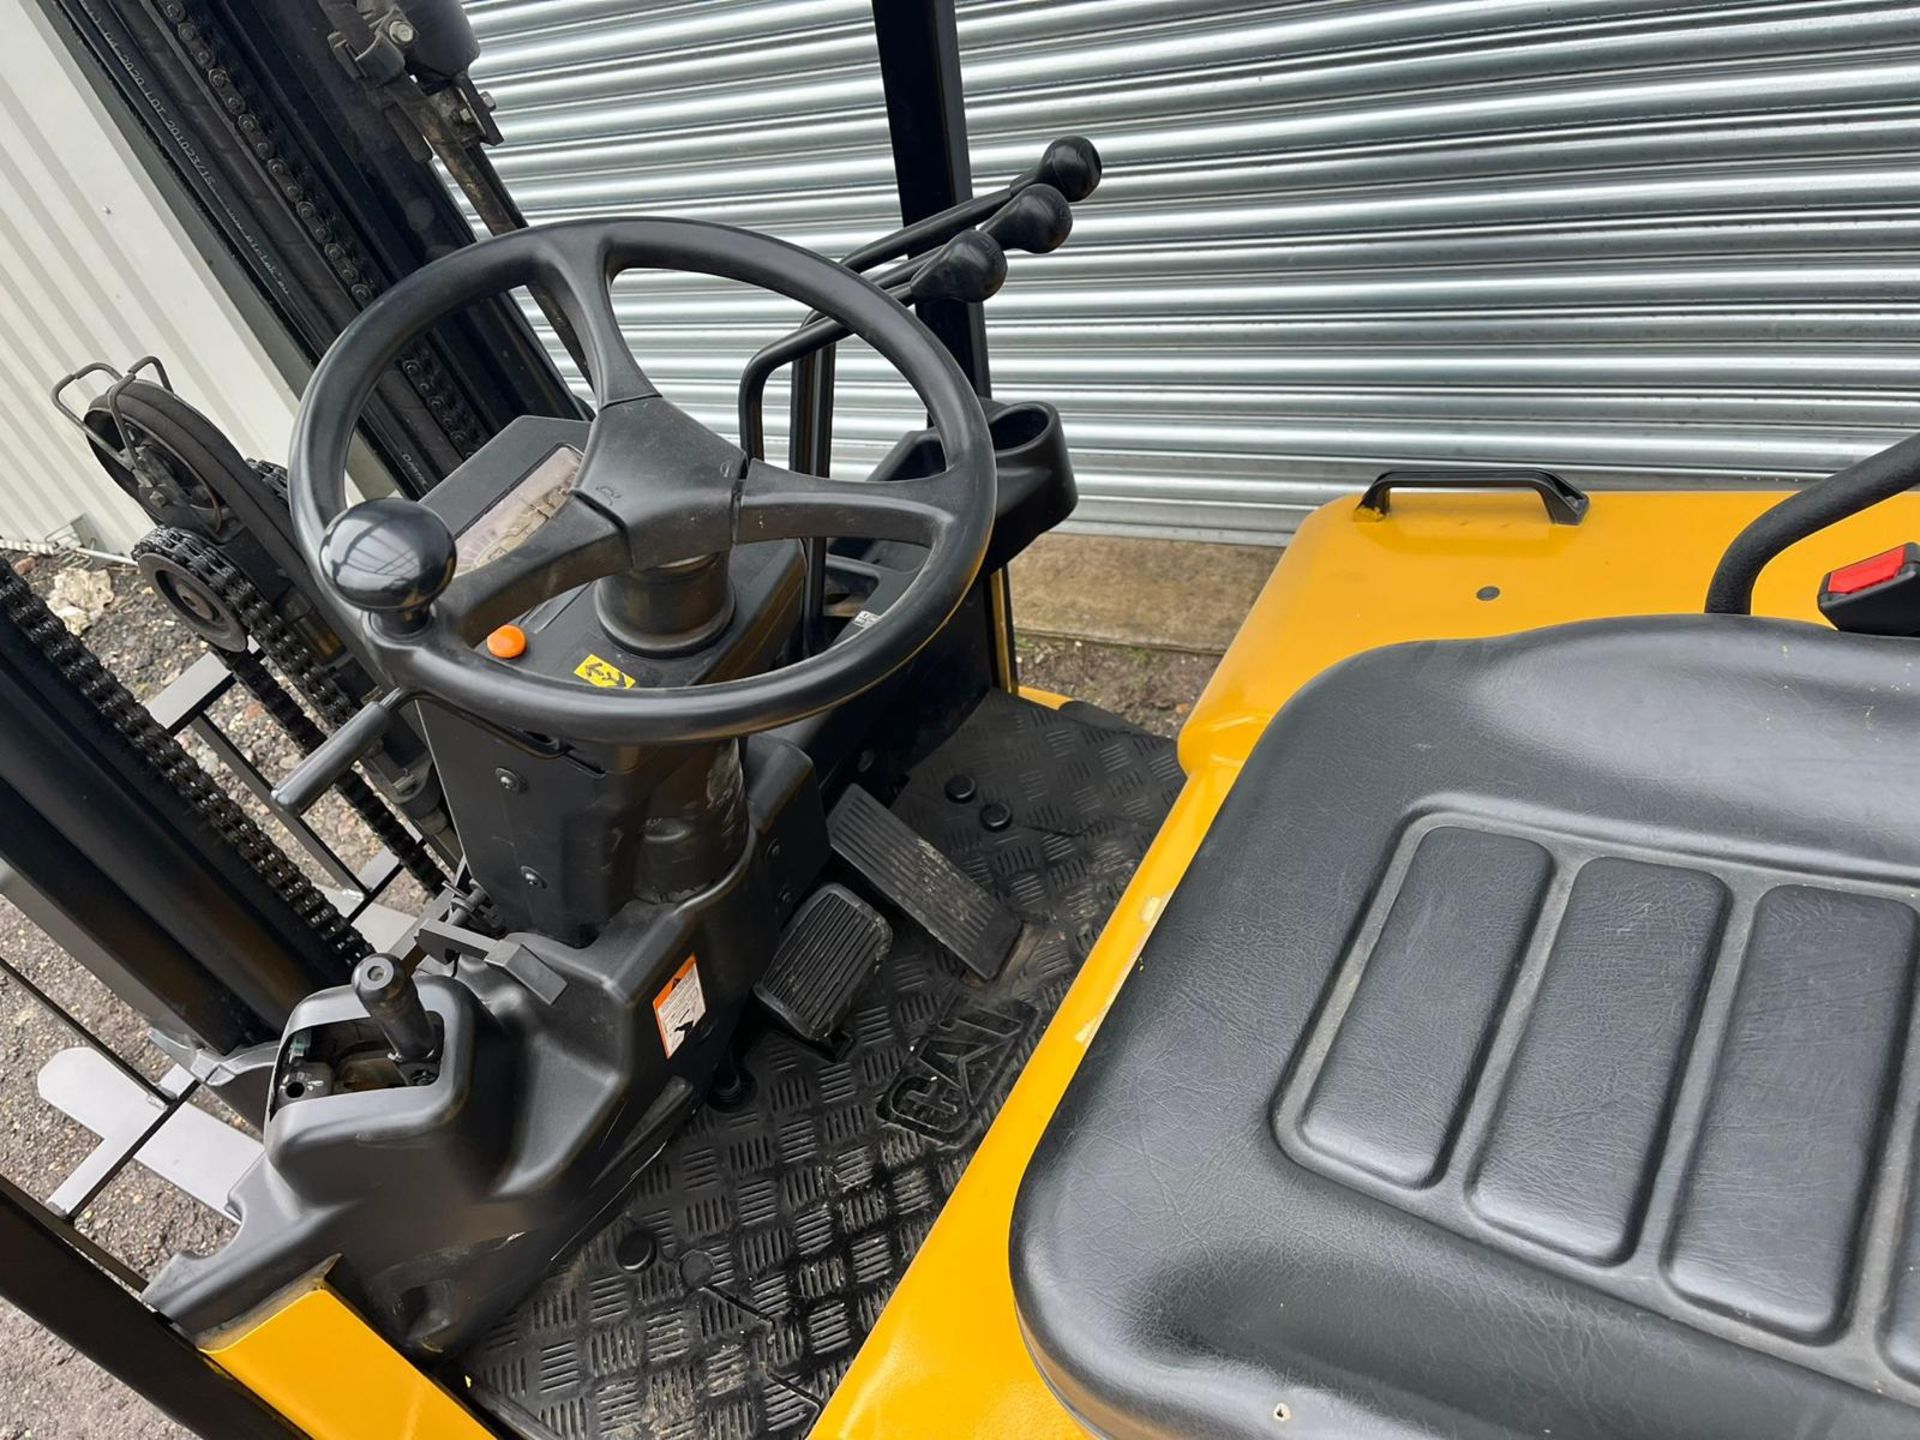 2014 - CATERPILLAR, EP25, 2.5 Tonne Electric Forklift - Image 4 of 7